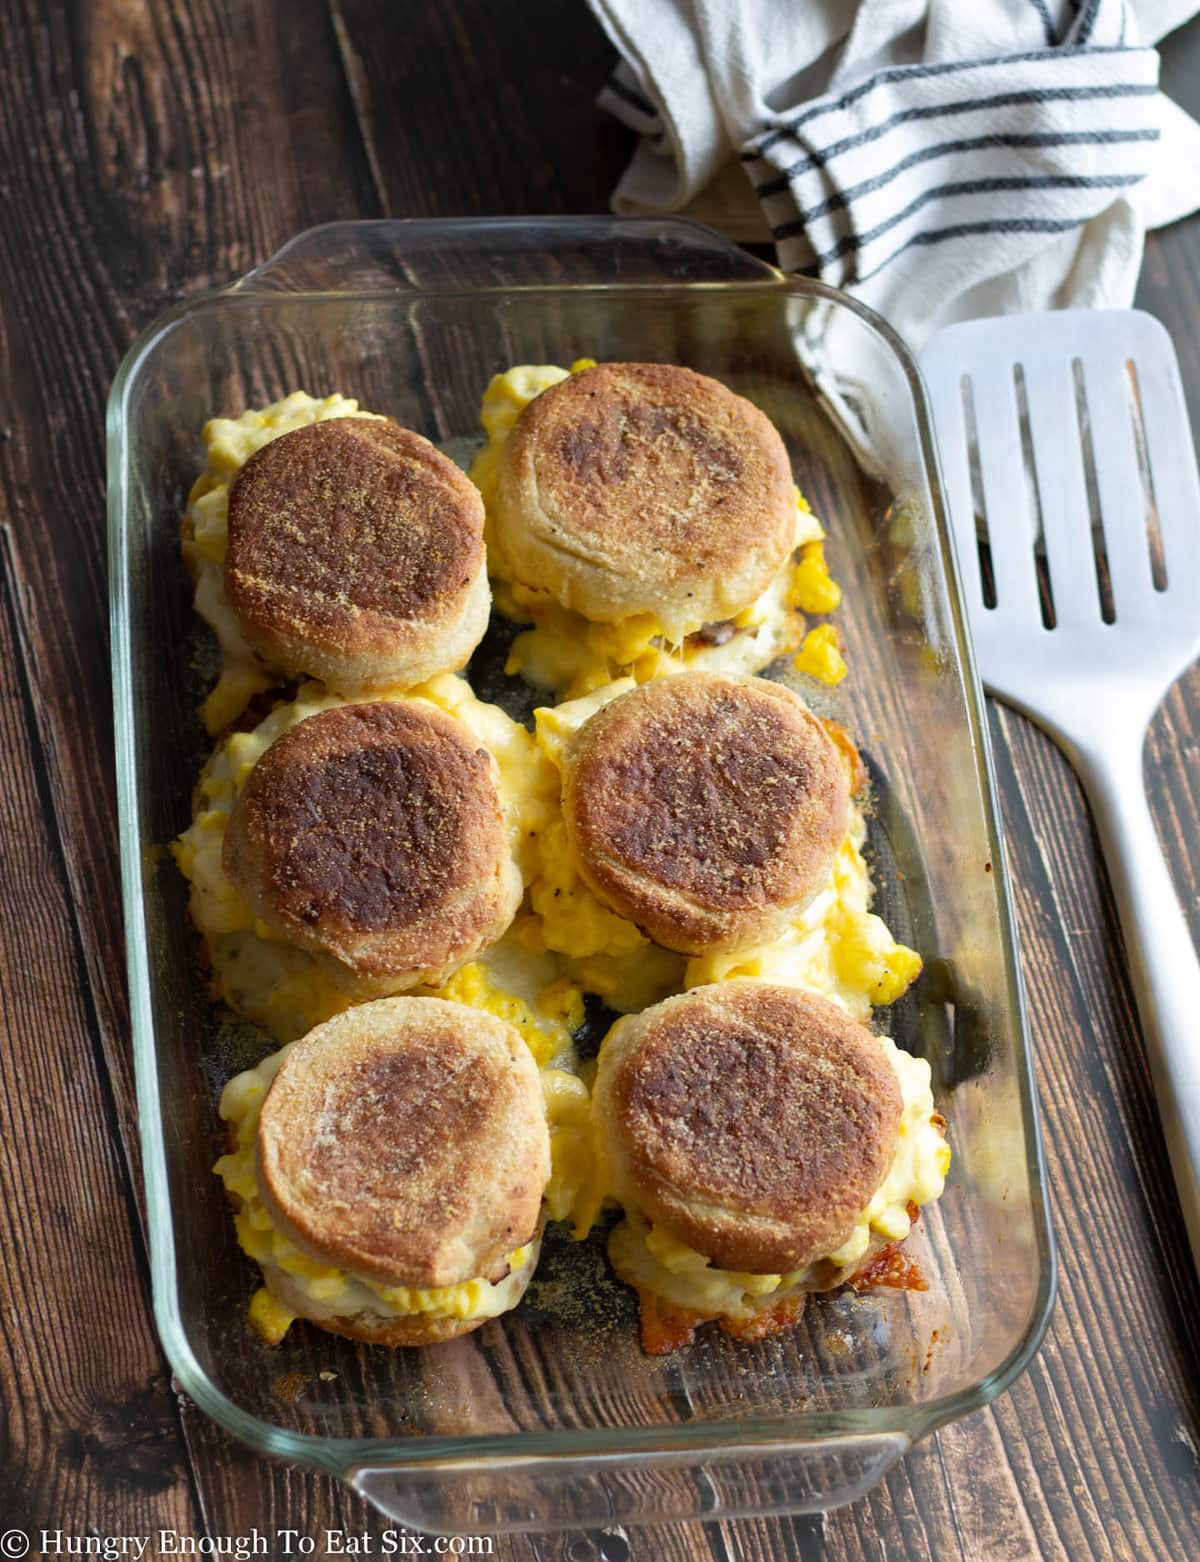 Baked breakfast sandwiches on English muffins.